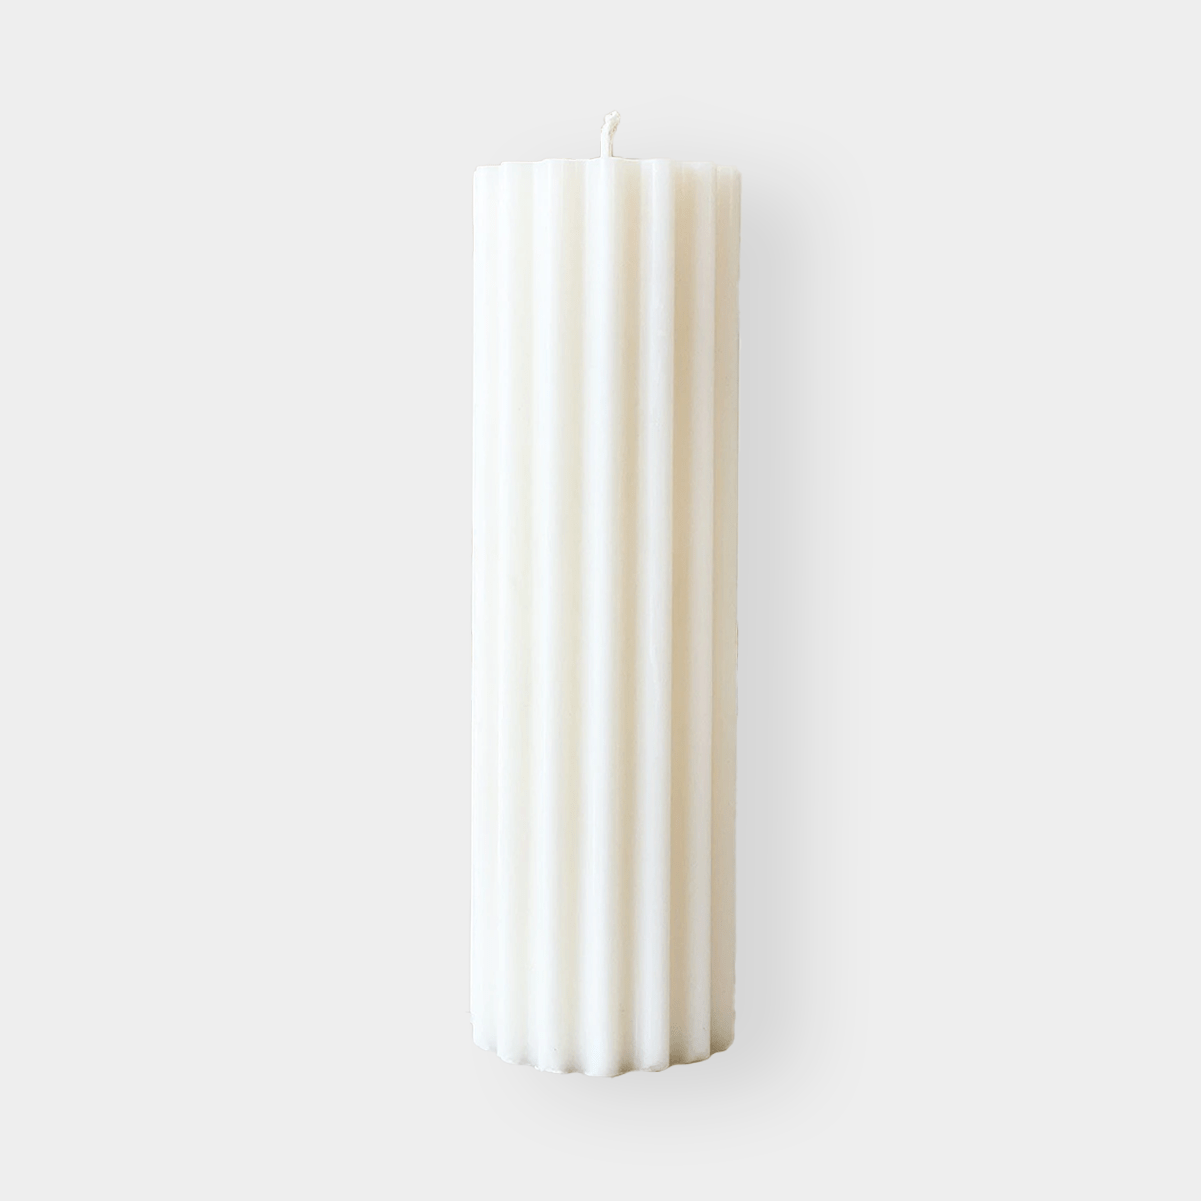 Make Scents of It Fluted Candle, Tall, White (7089194041532)